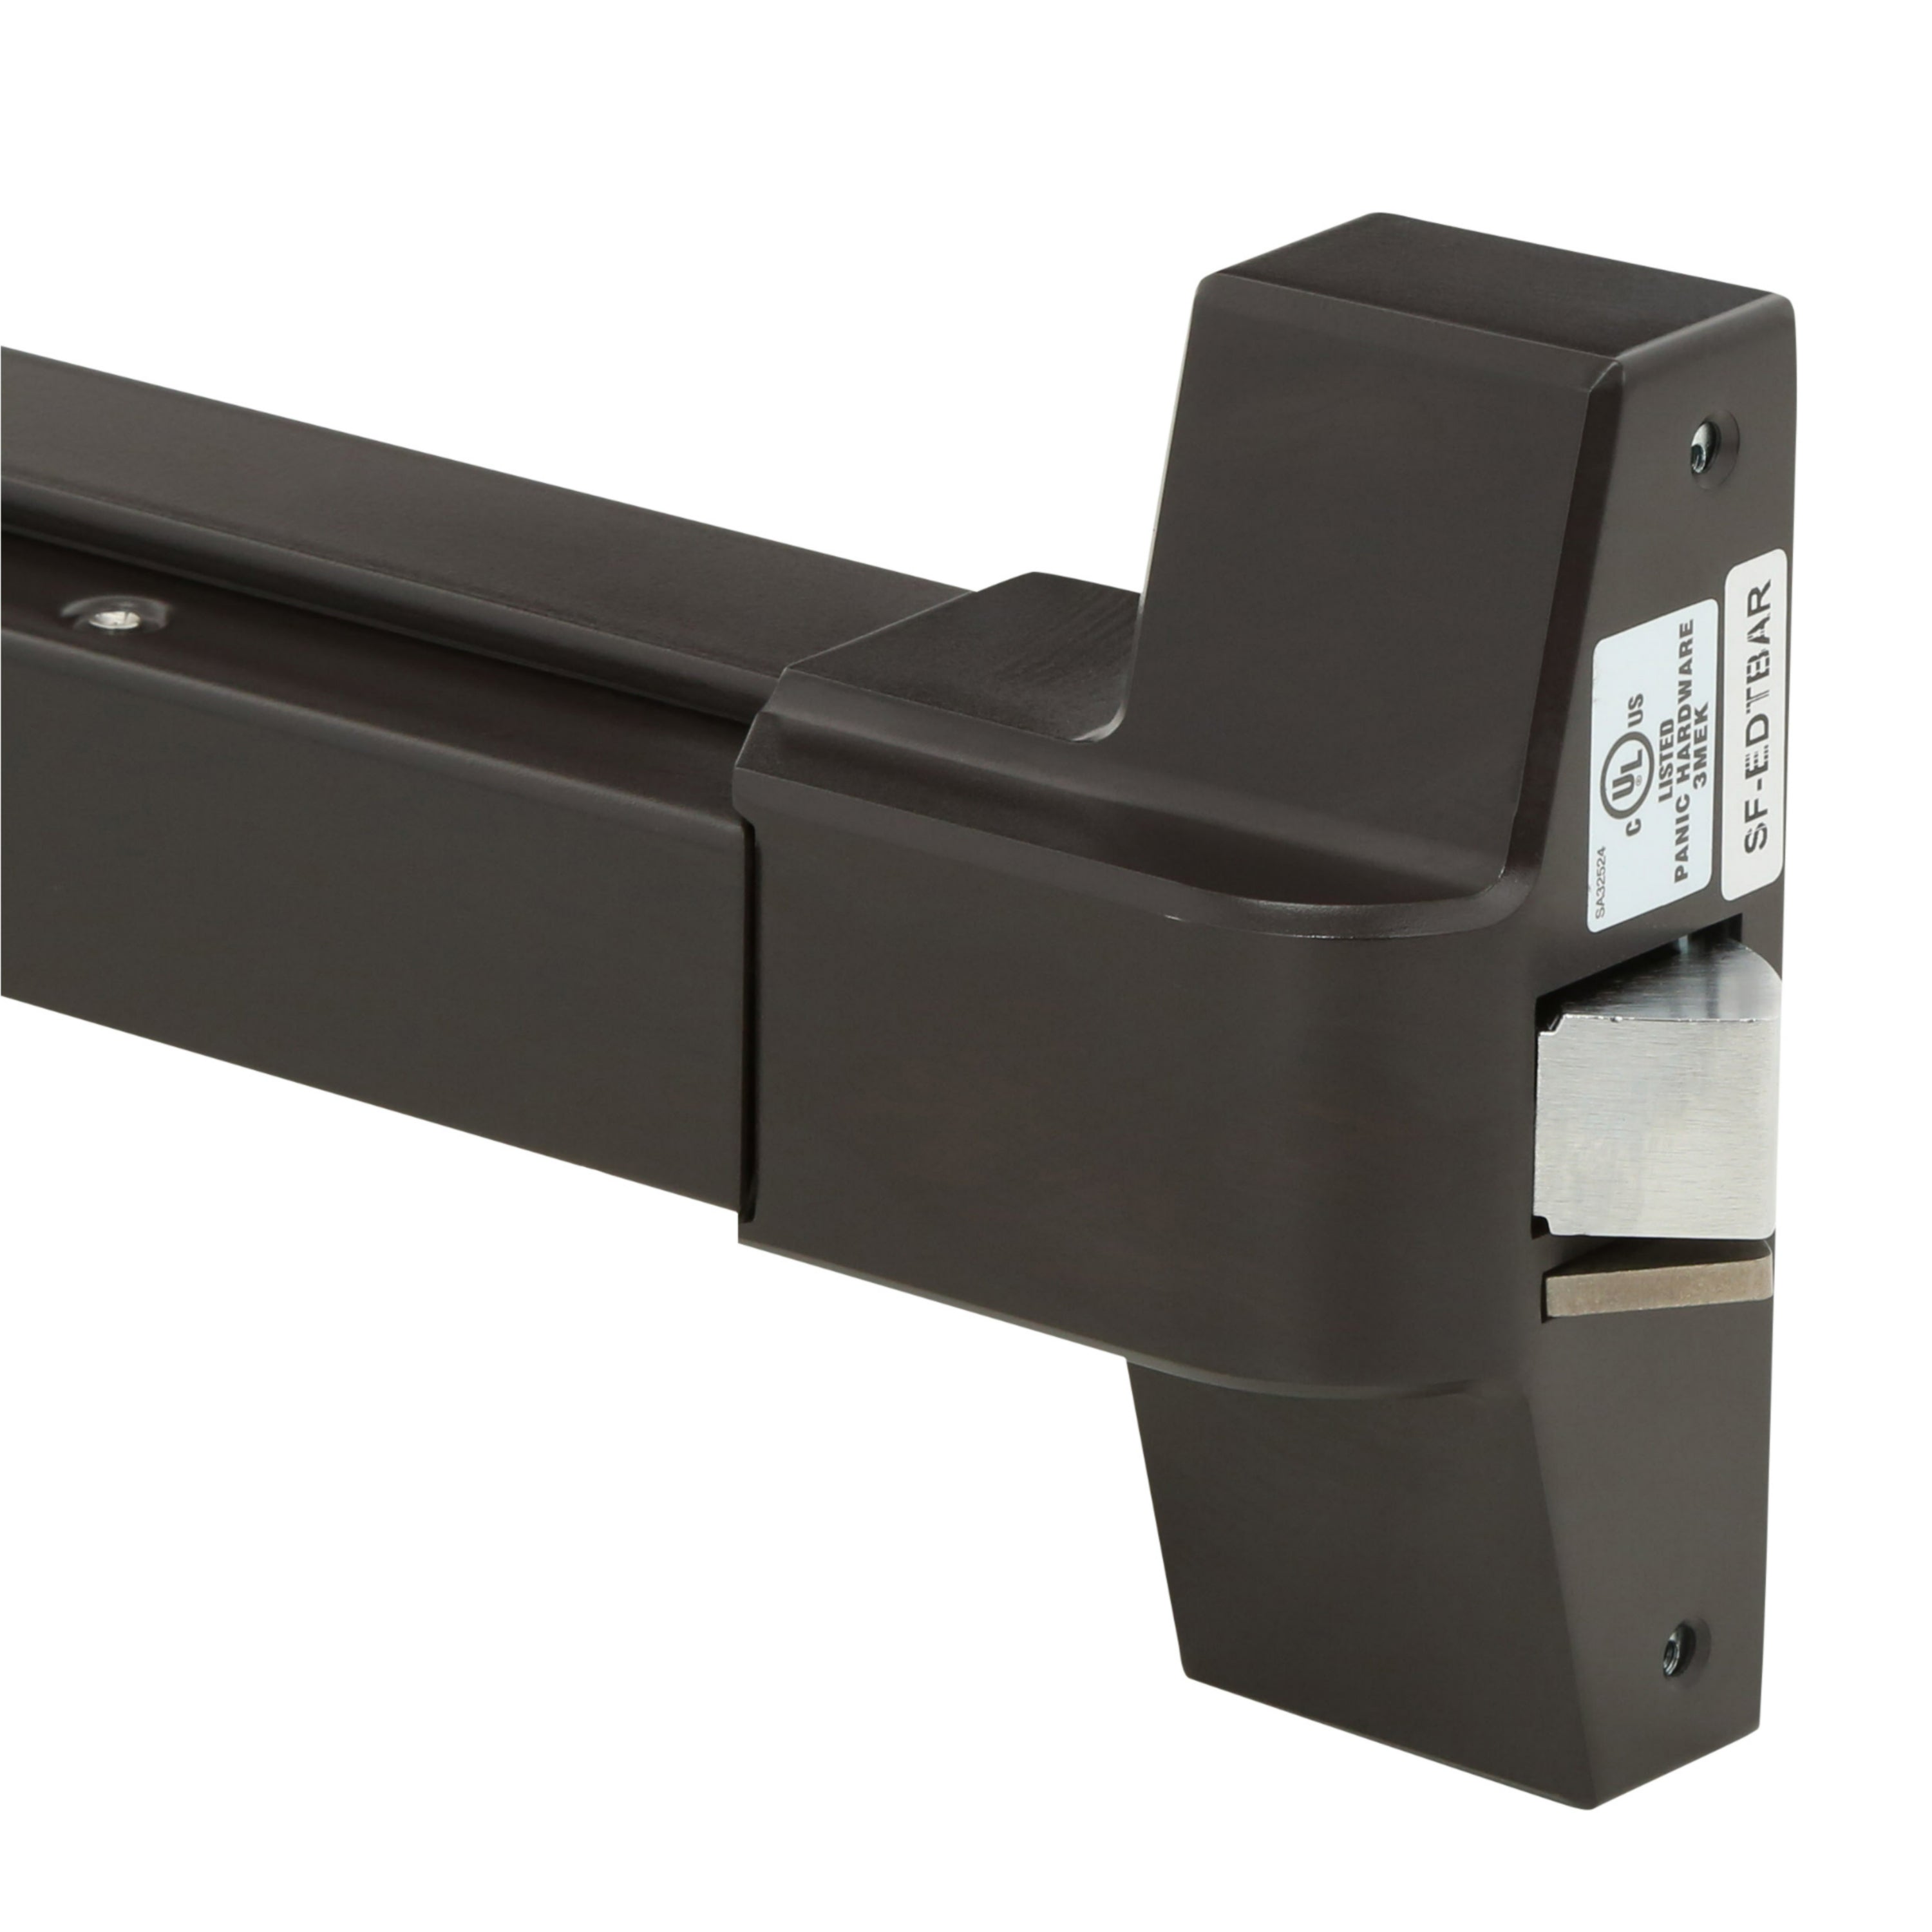 EDTBAR Series Grade 2 Commercial 36 in Fire Rated Rim Touch Bar Exit Device -  Pro-Edge HD